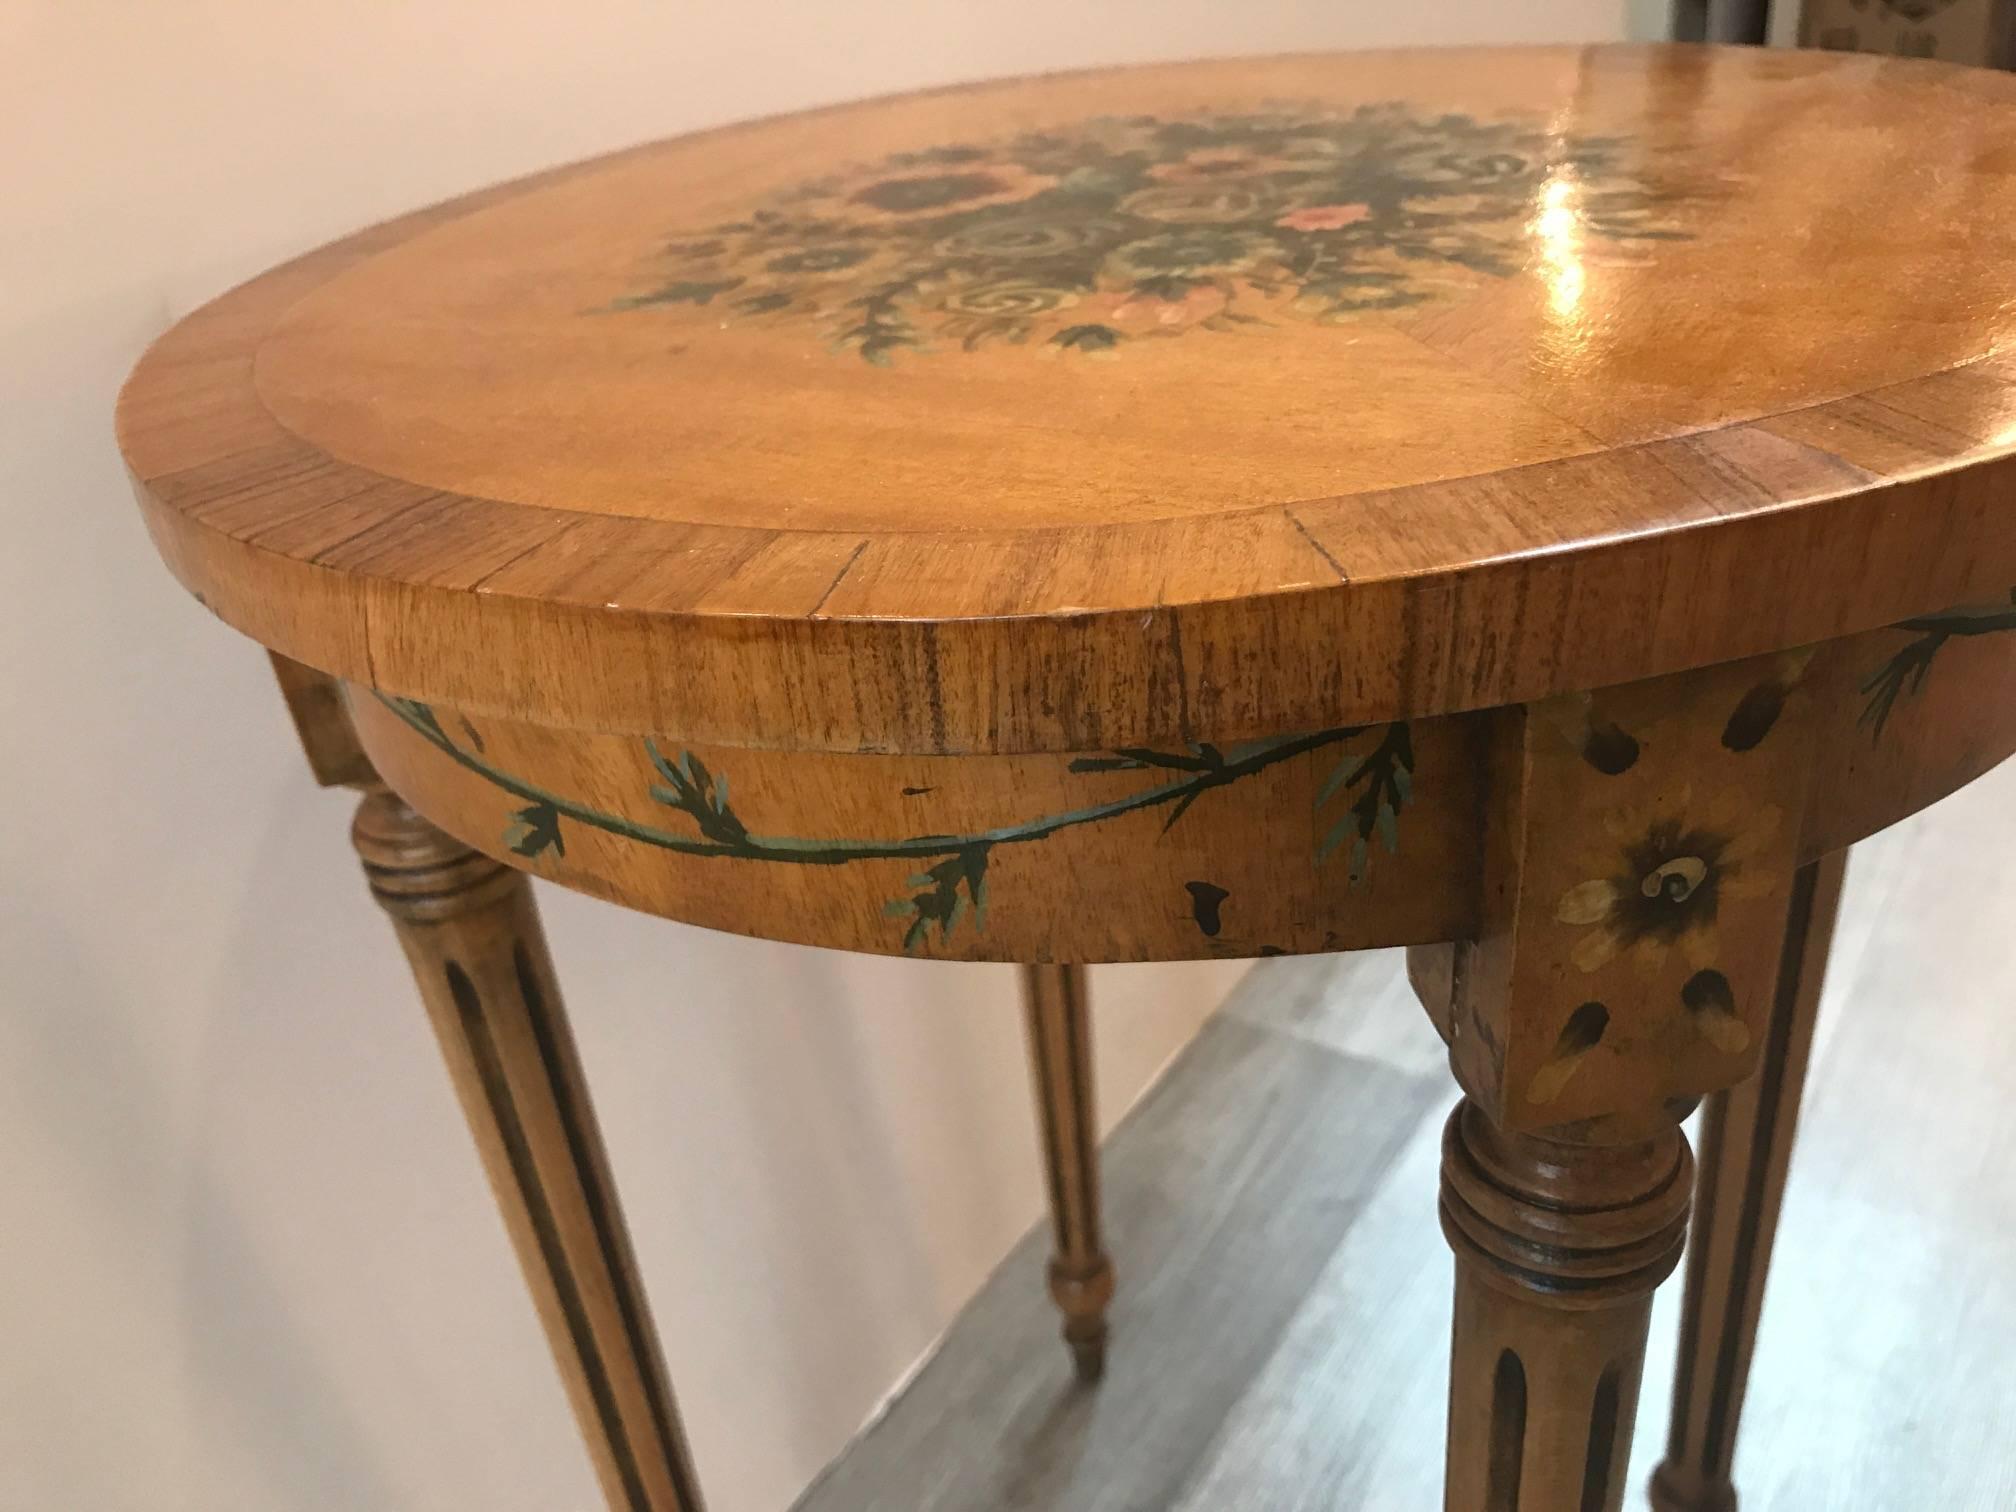 An English Adam style satinwood round drinks table. The hand-painted floral decoration on the top and around the apron with banded edge. Diminutive size, 15 inches diameter, 20 inches tall.